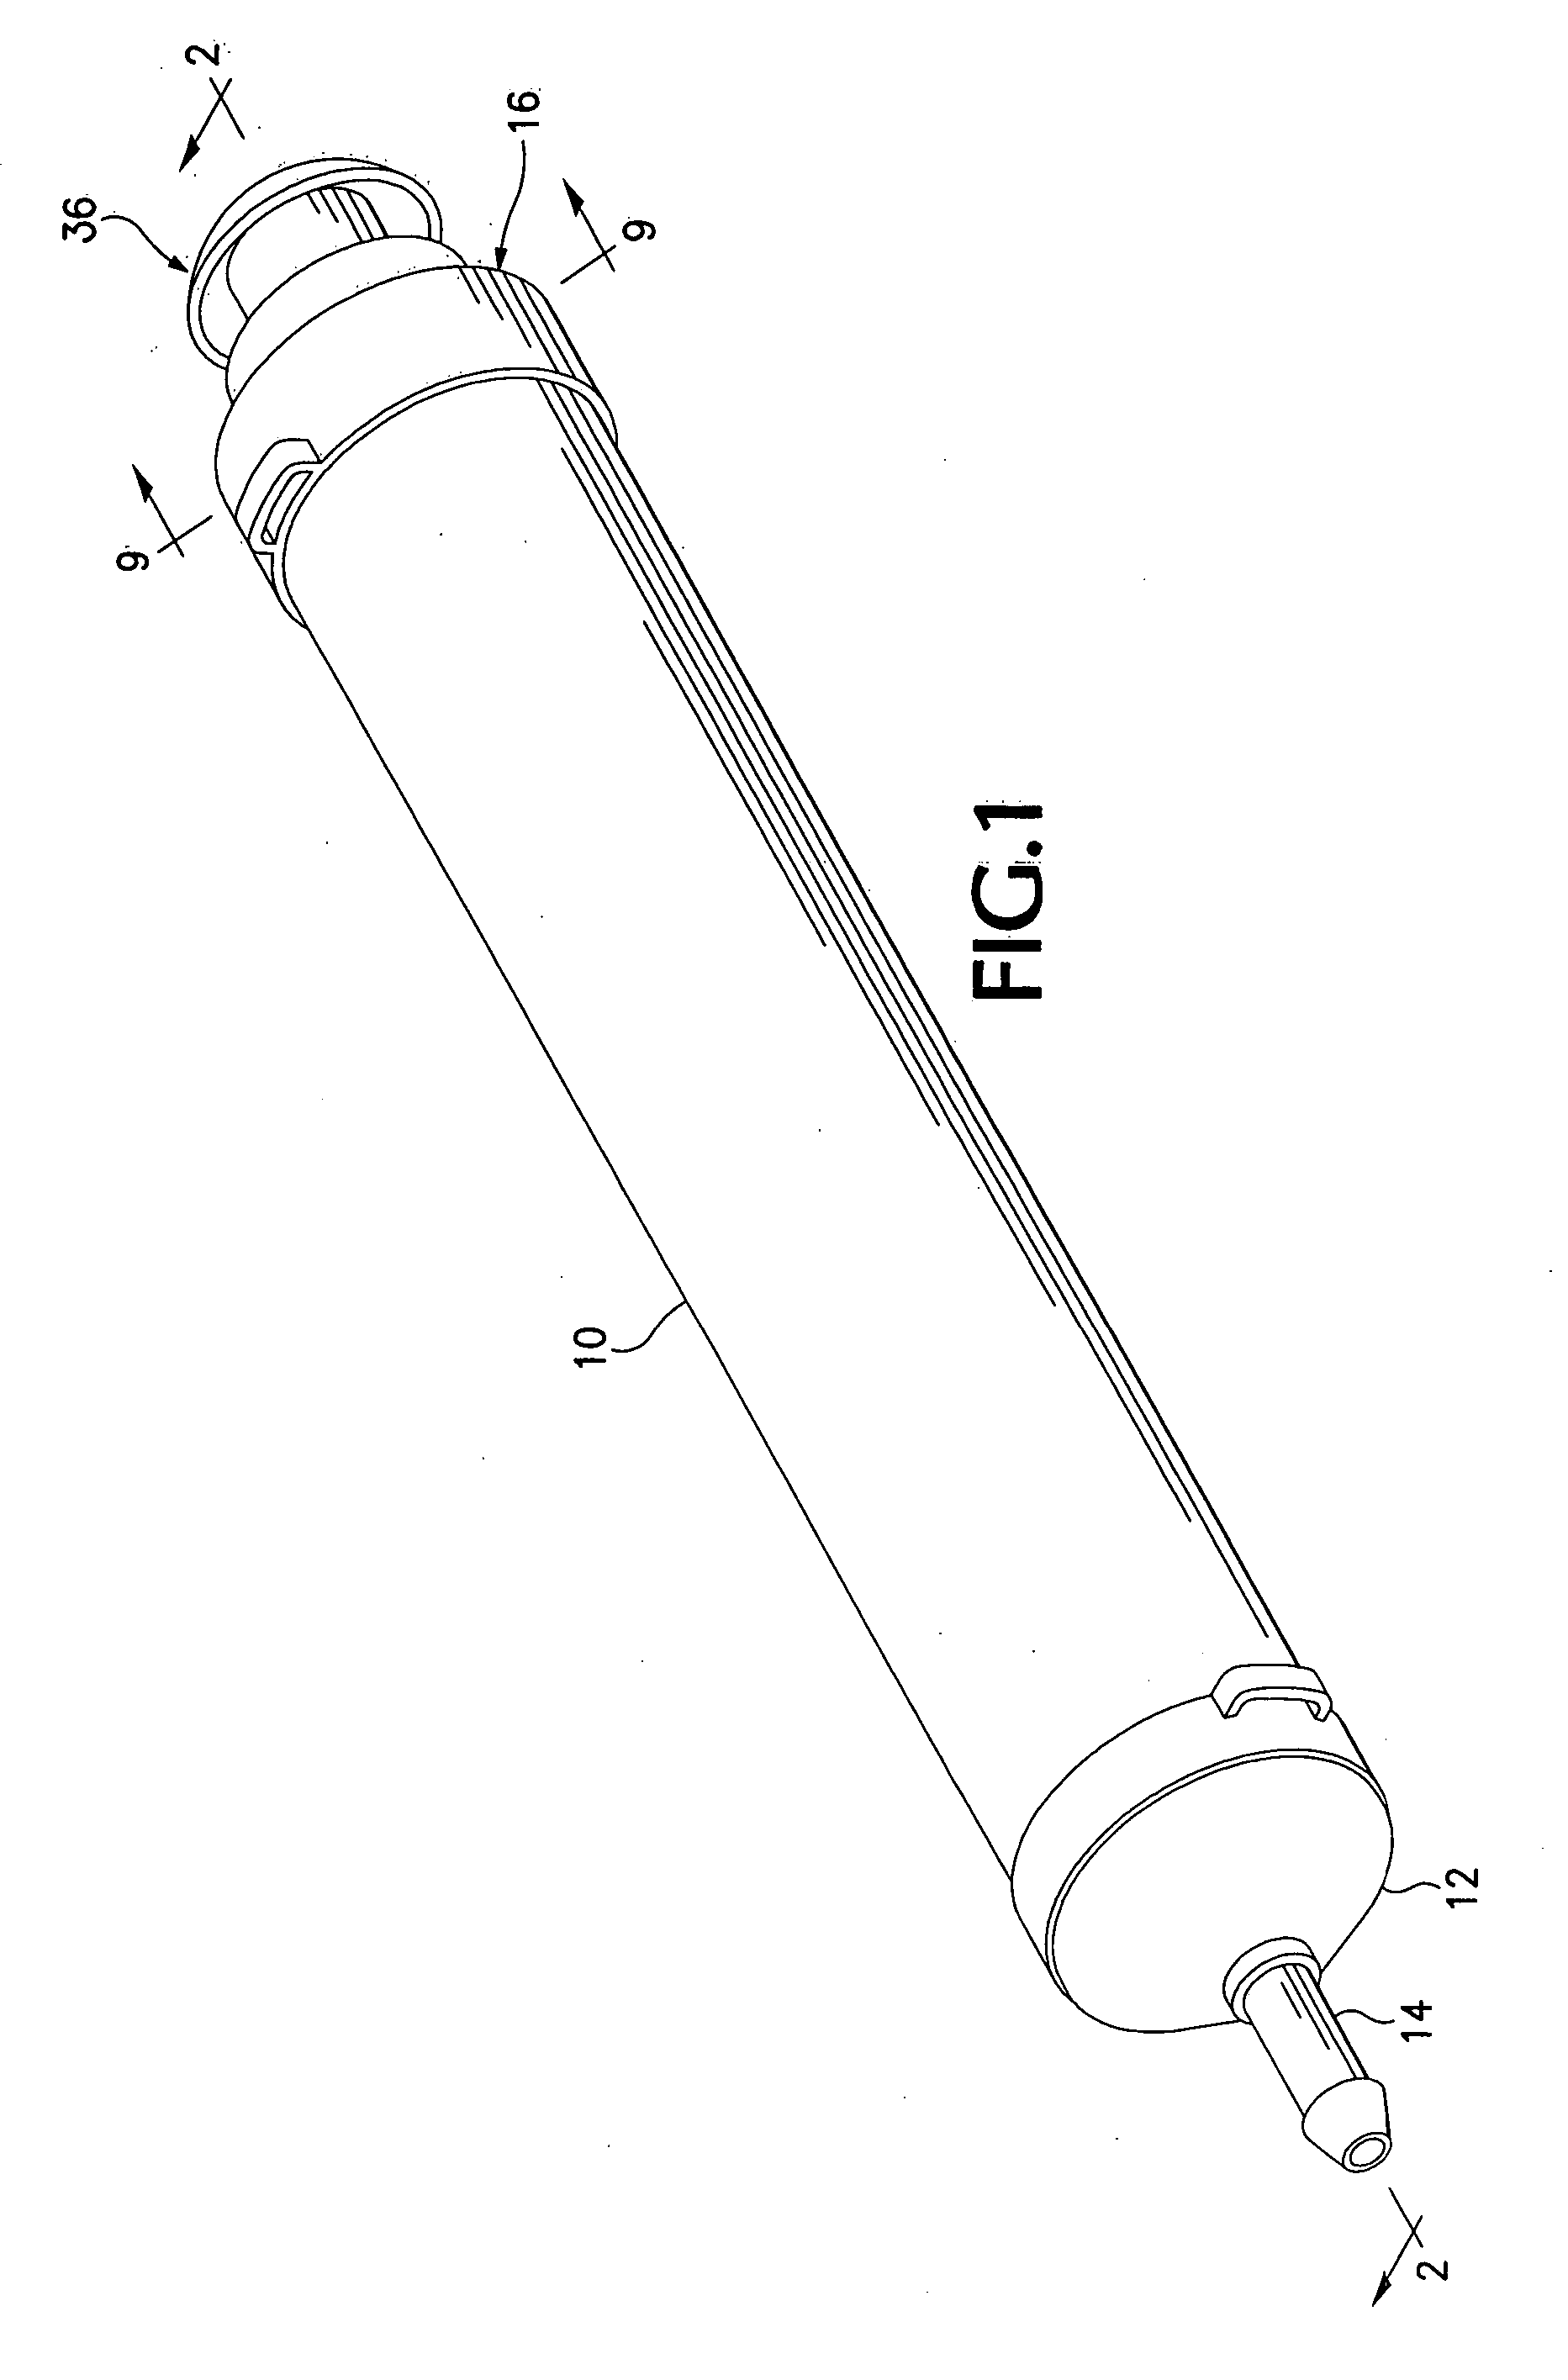 Two-stage hand pump